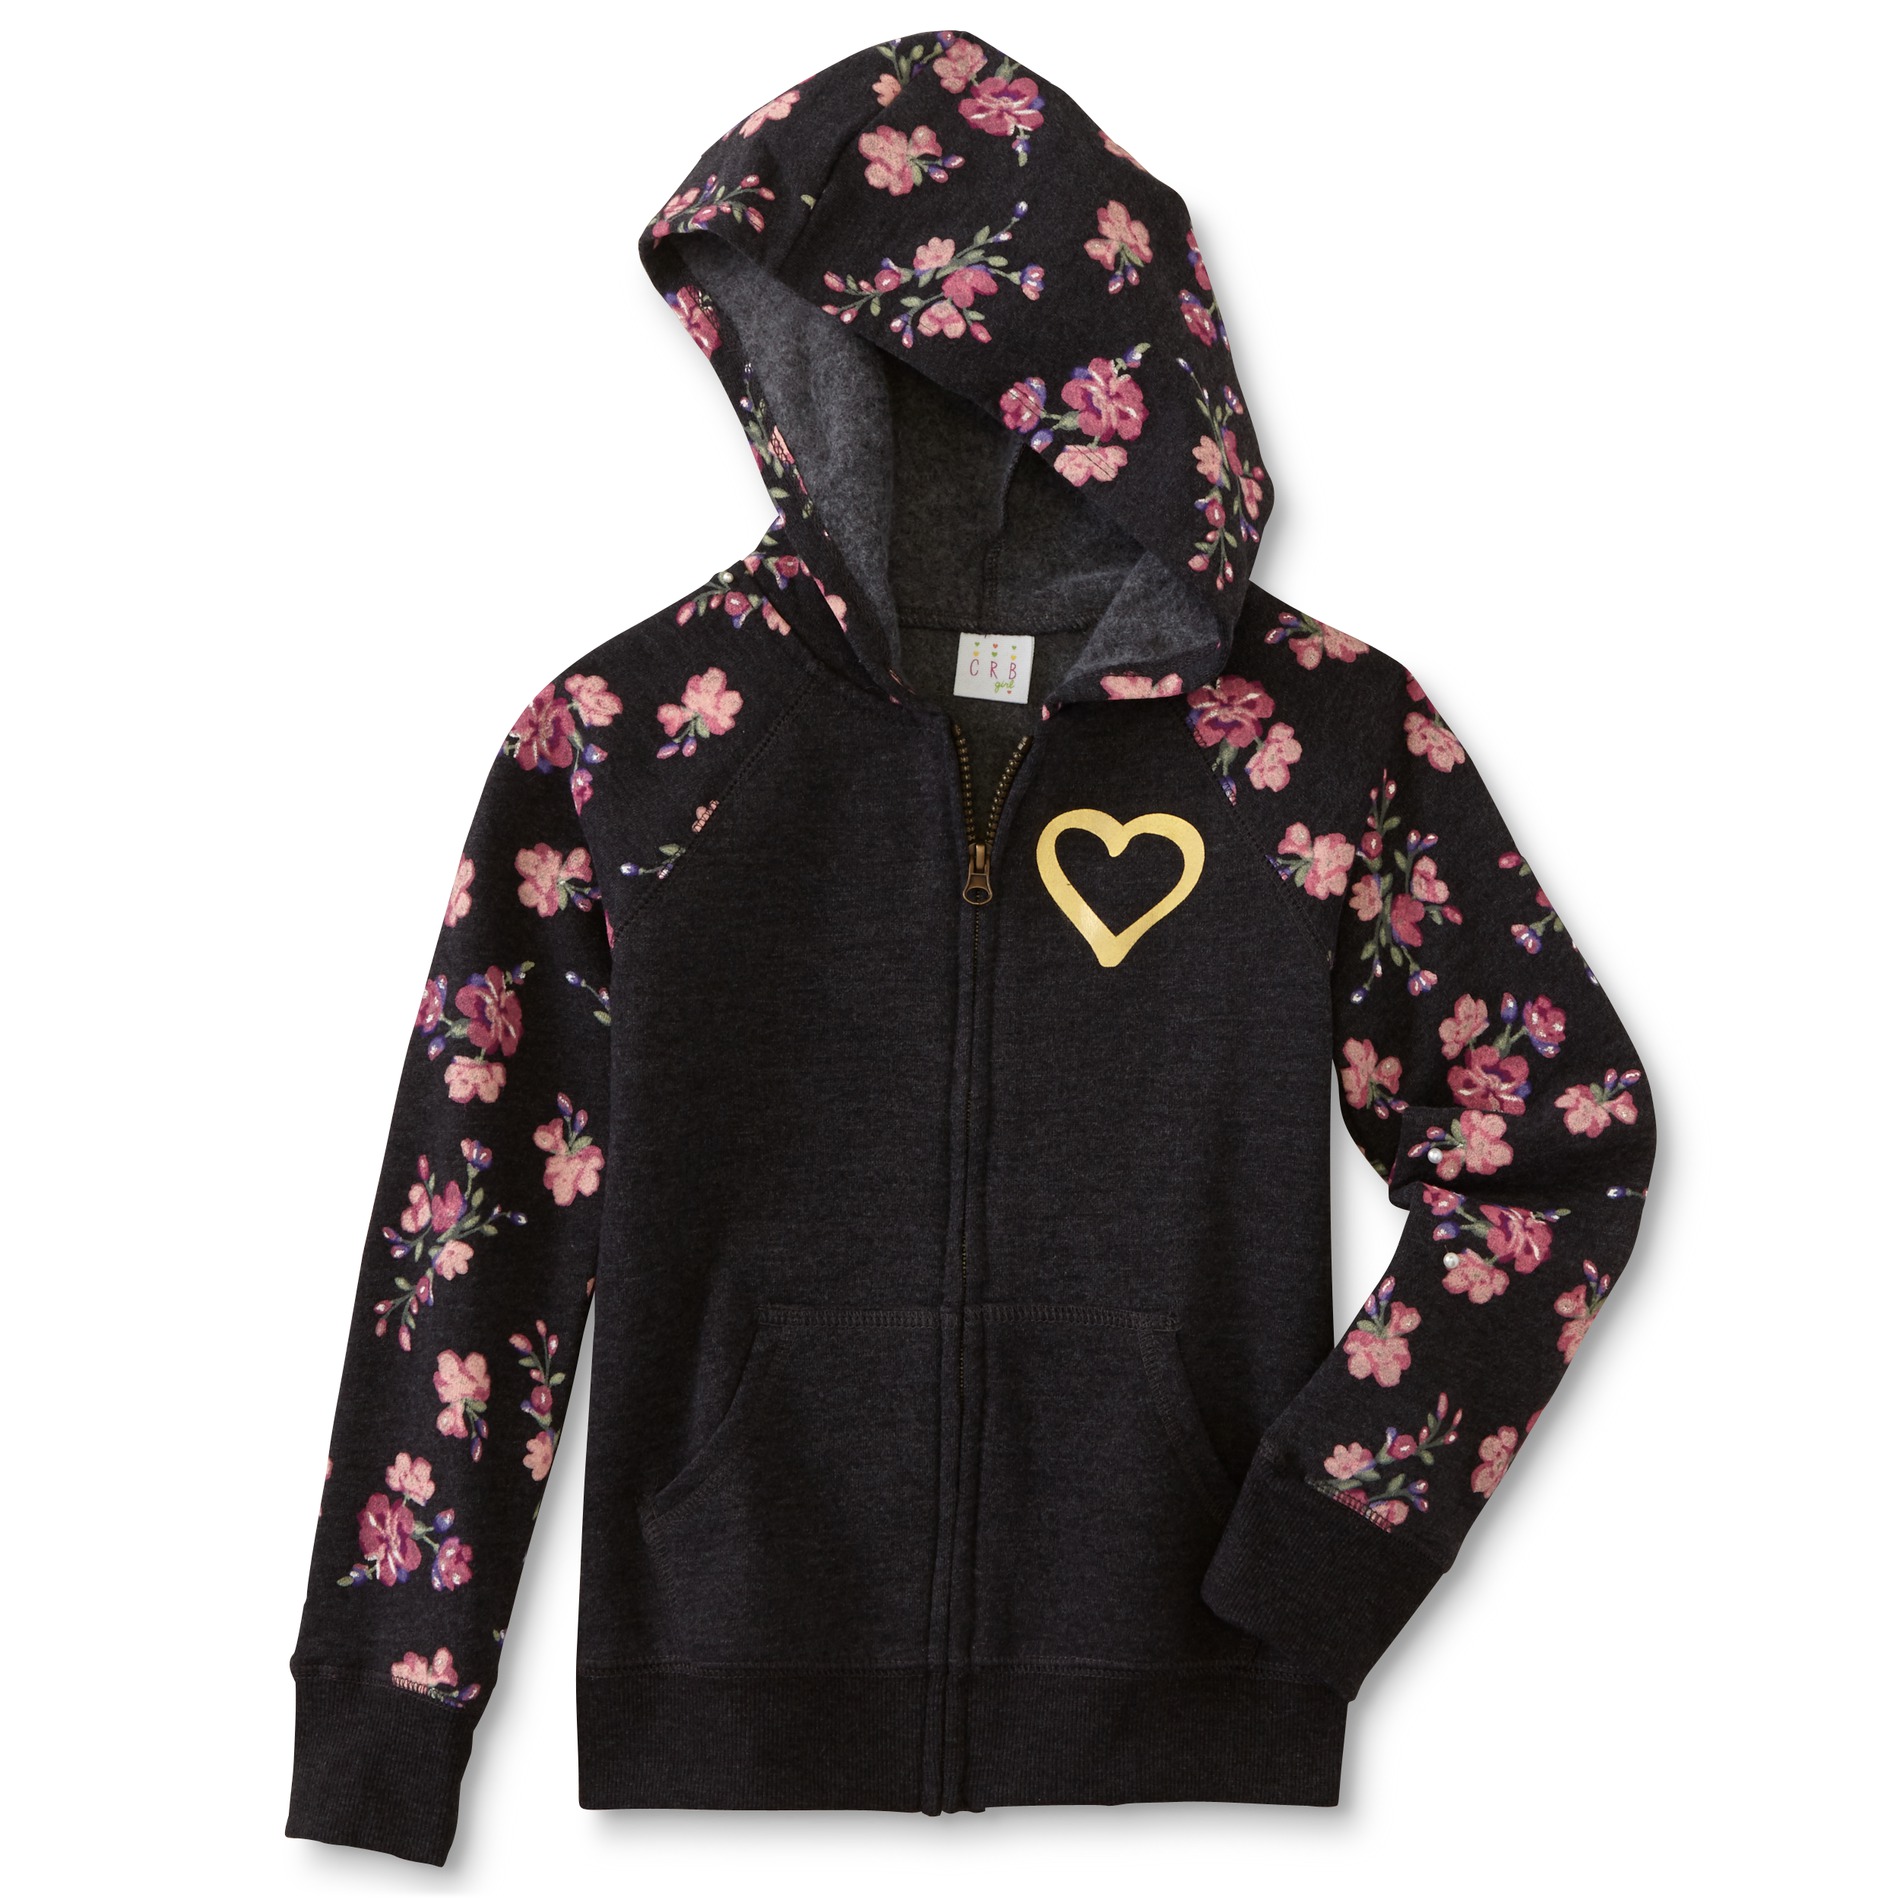 Canyon River Blues Girl's Graphic Hoodie Jacket - Floral